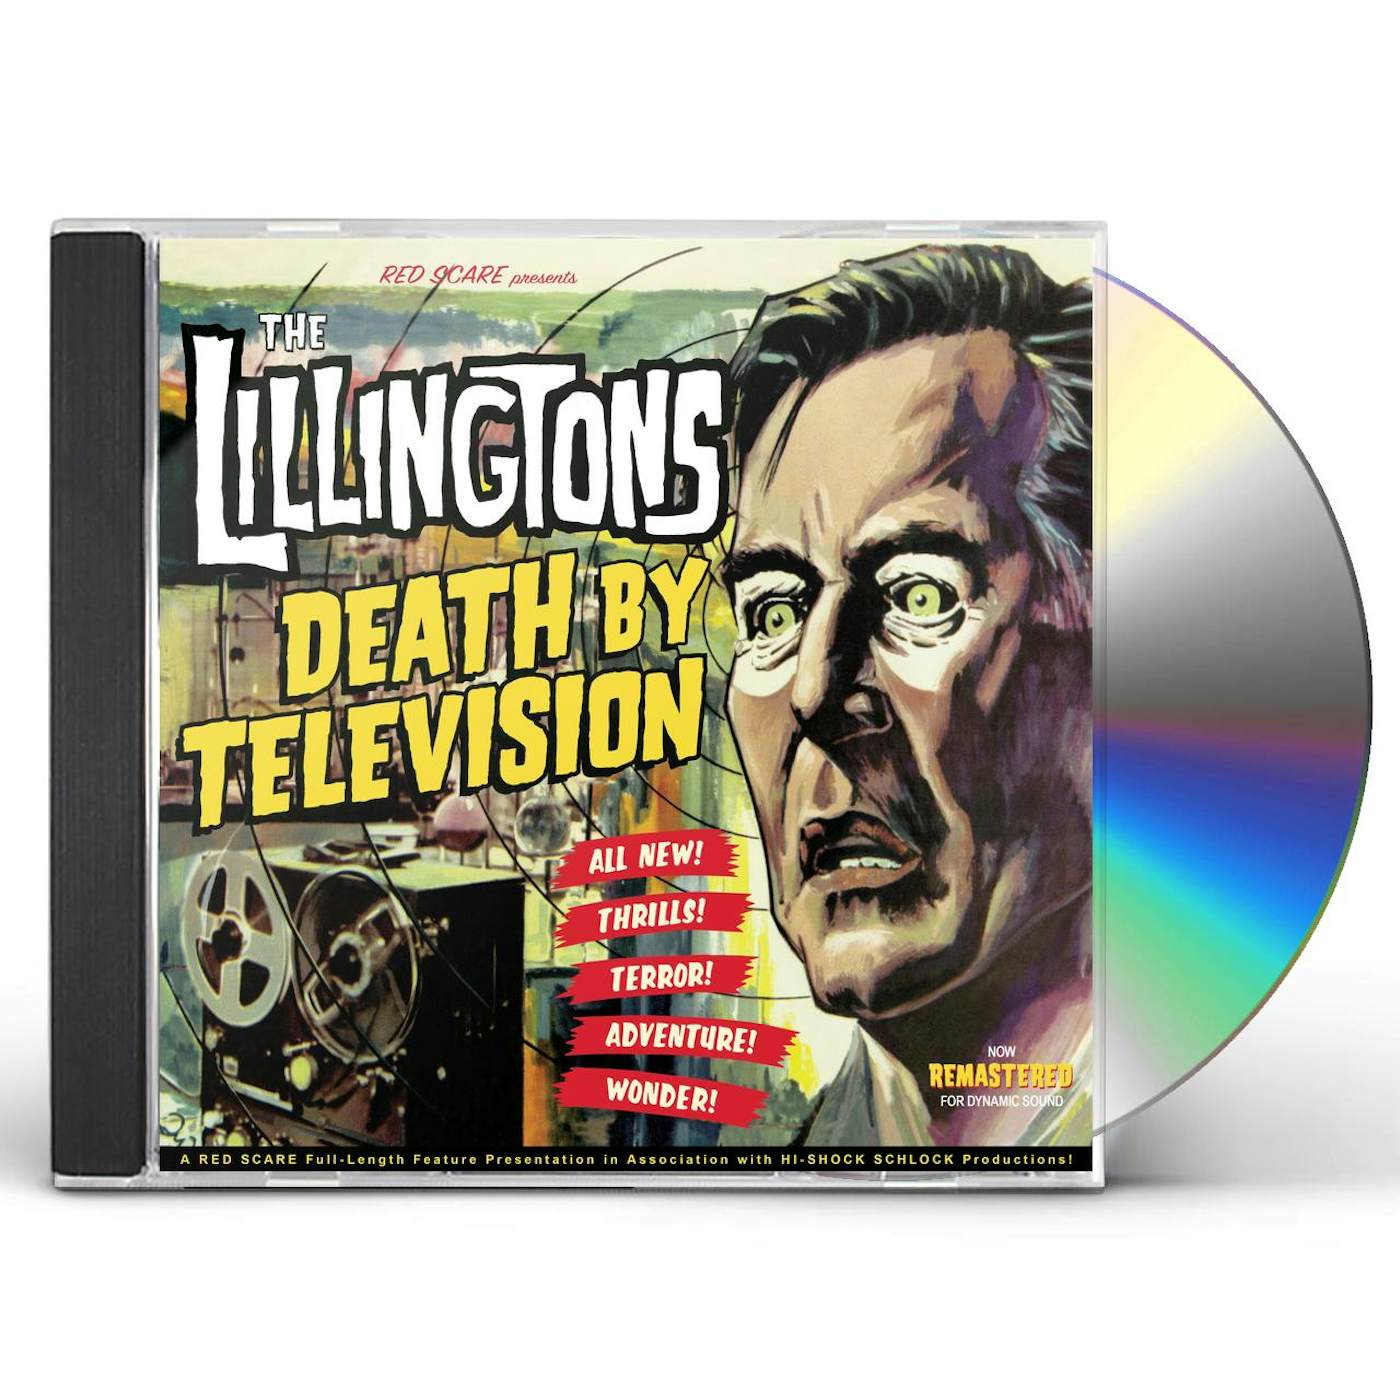 The Lillingtons DEATH BY TELEVISION CD